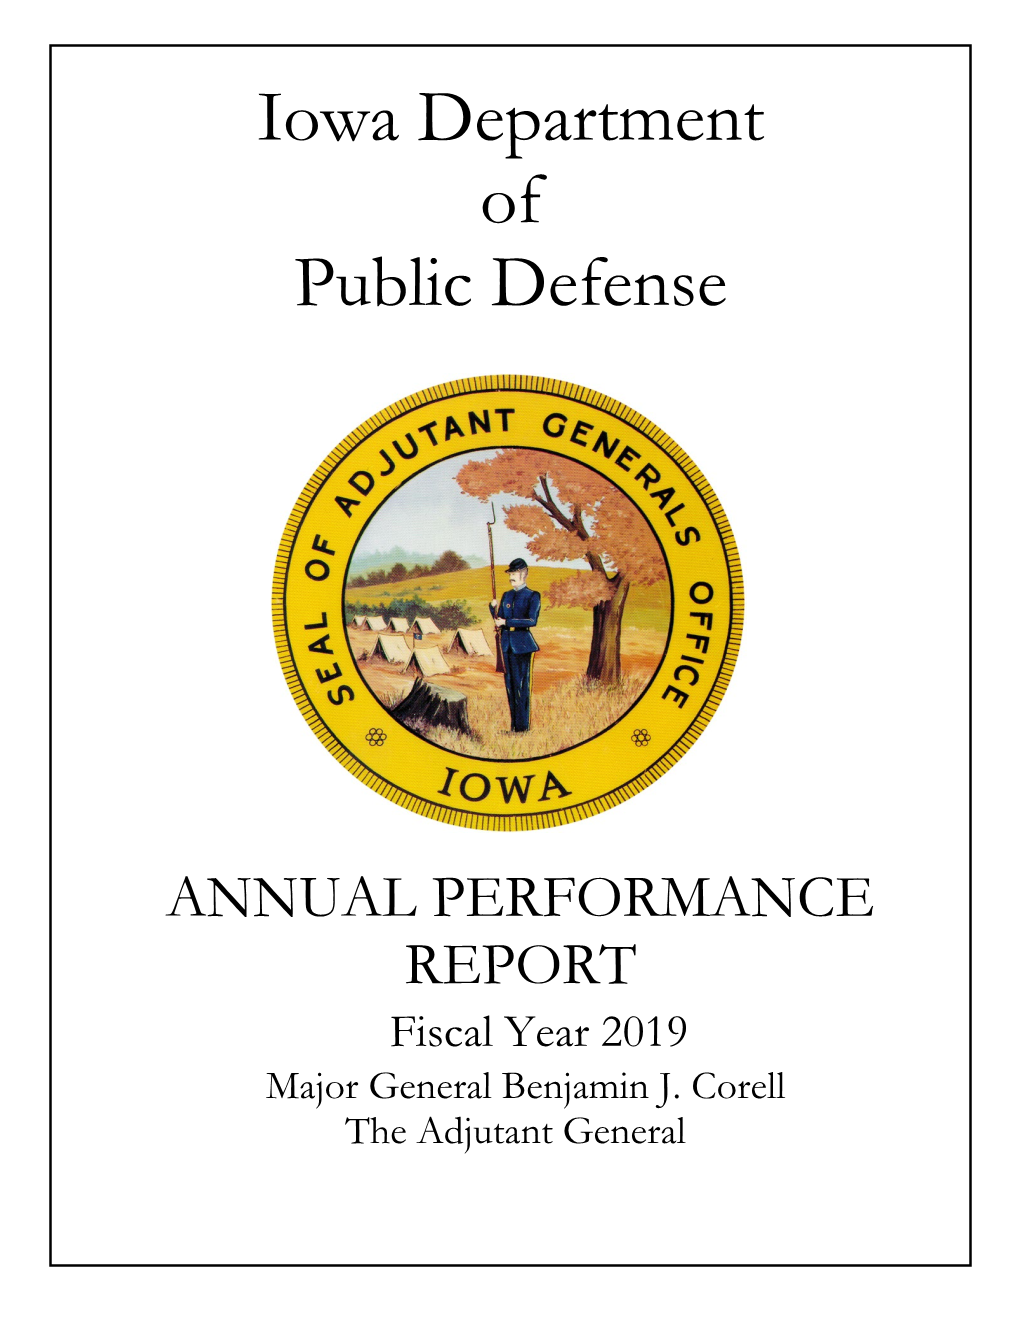 Department of Public Defense Annual Report, Which Summarizes Our Department’S Major Accomplishments, Achievements, and Activities